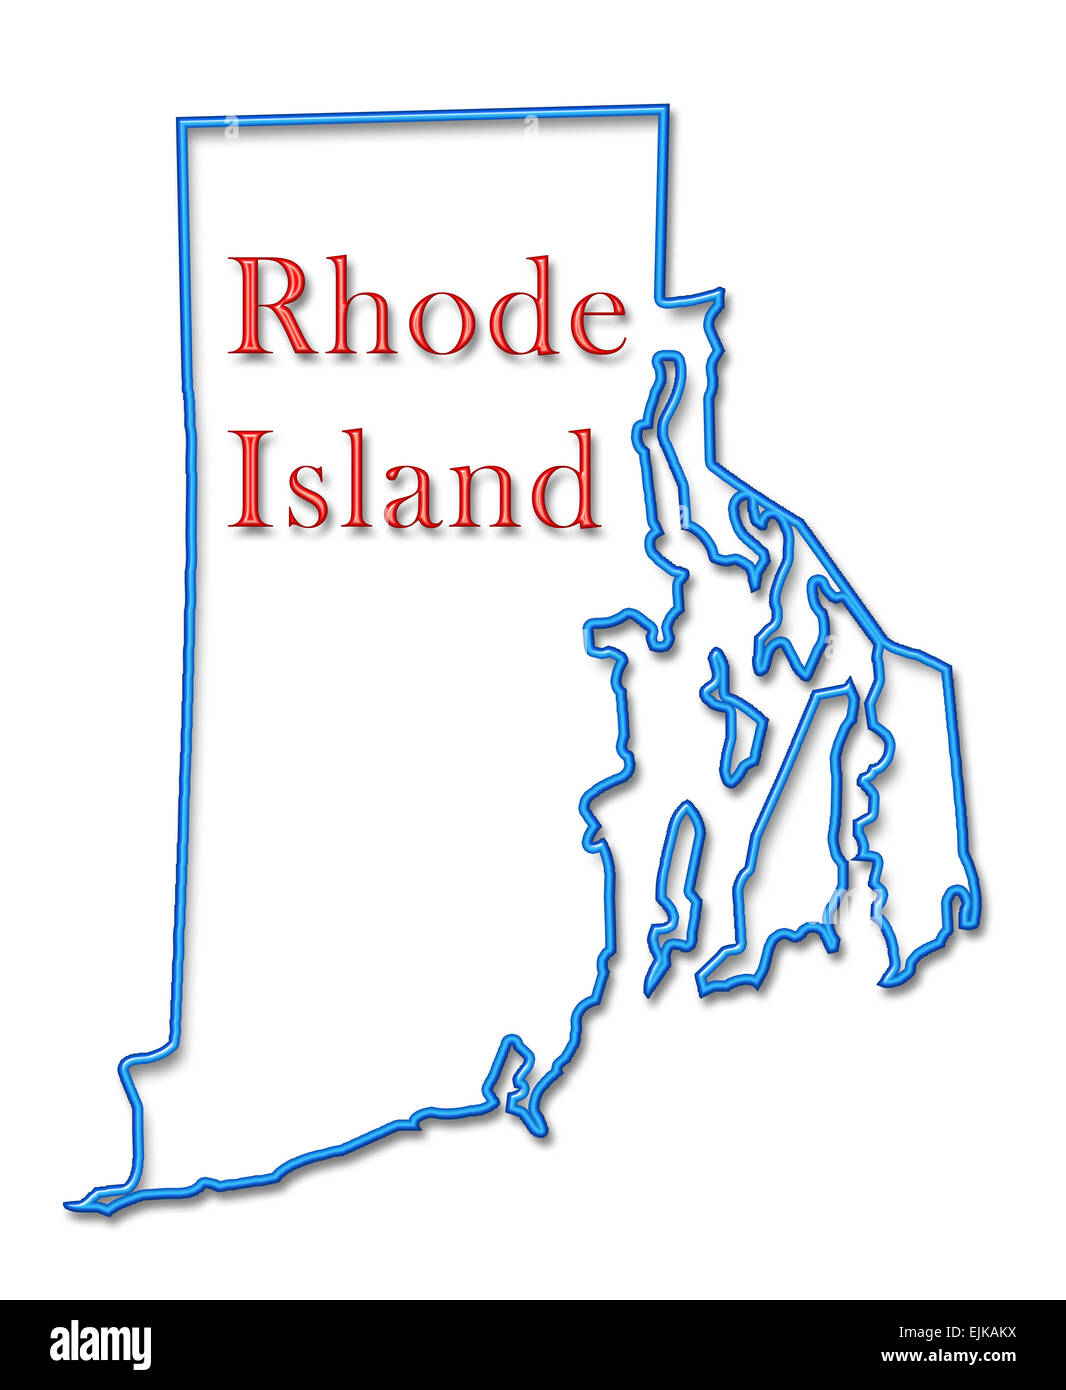 Rhode Island Map with Neon Blue Outline and Red Lettering Stock Photo